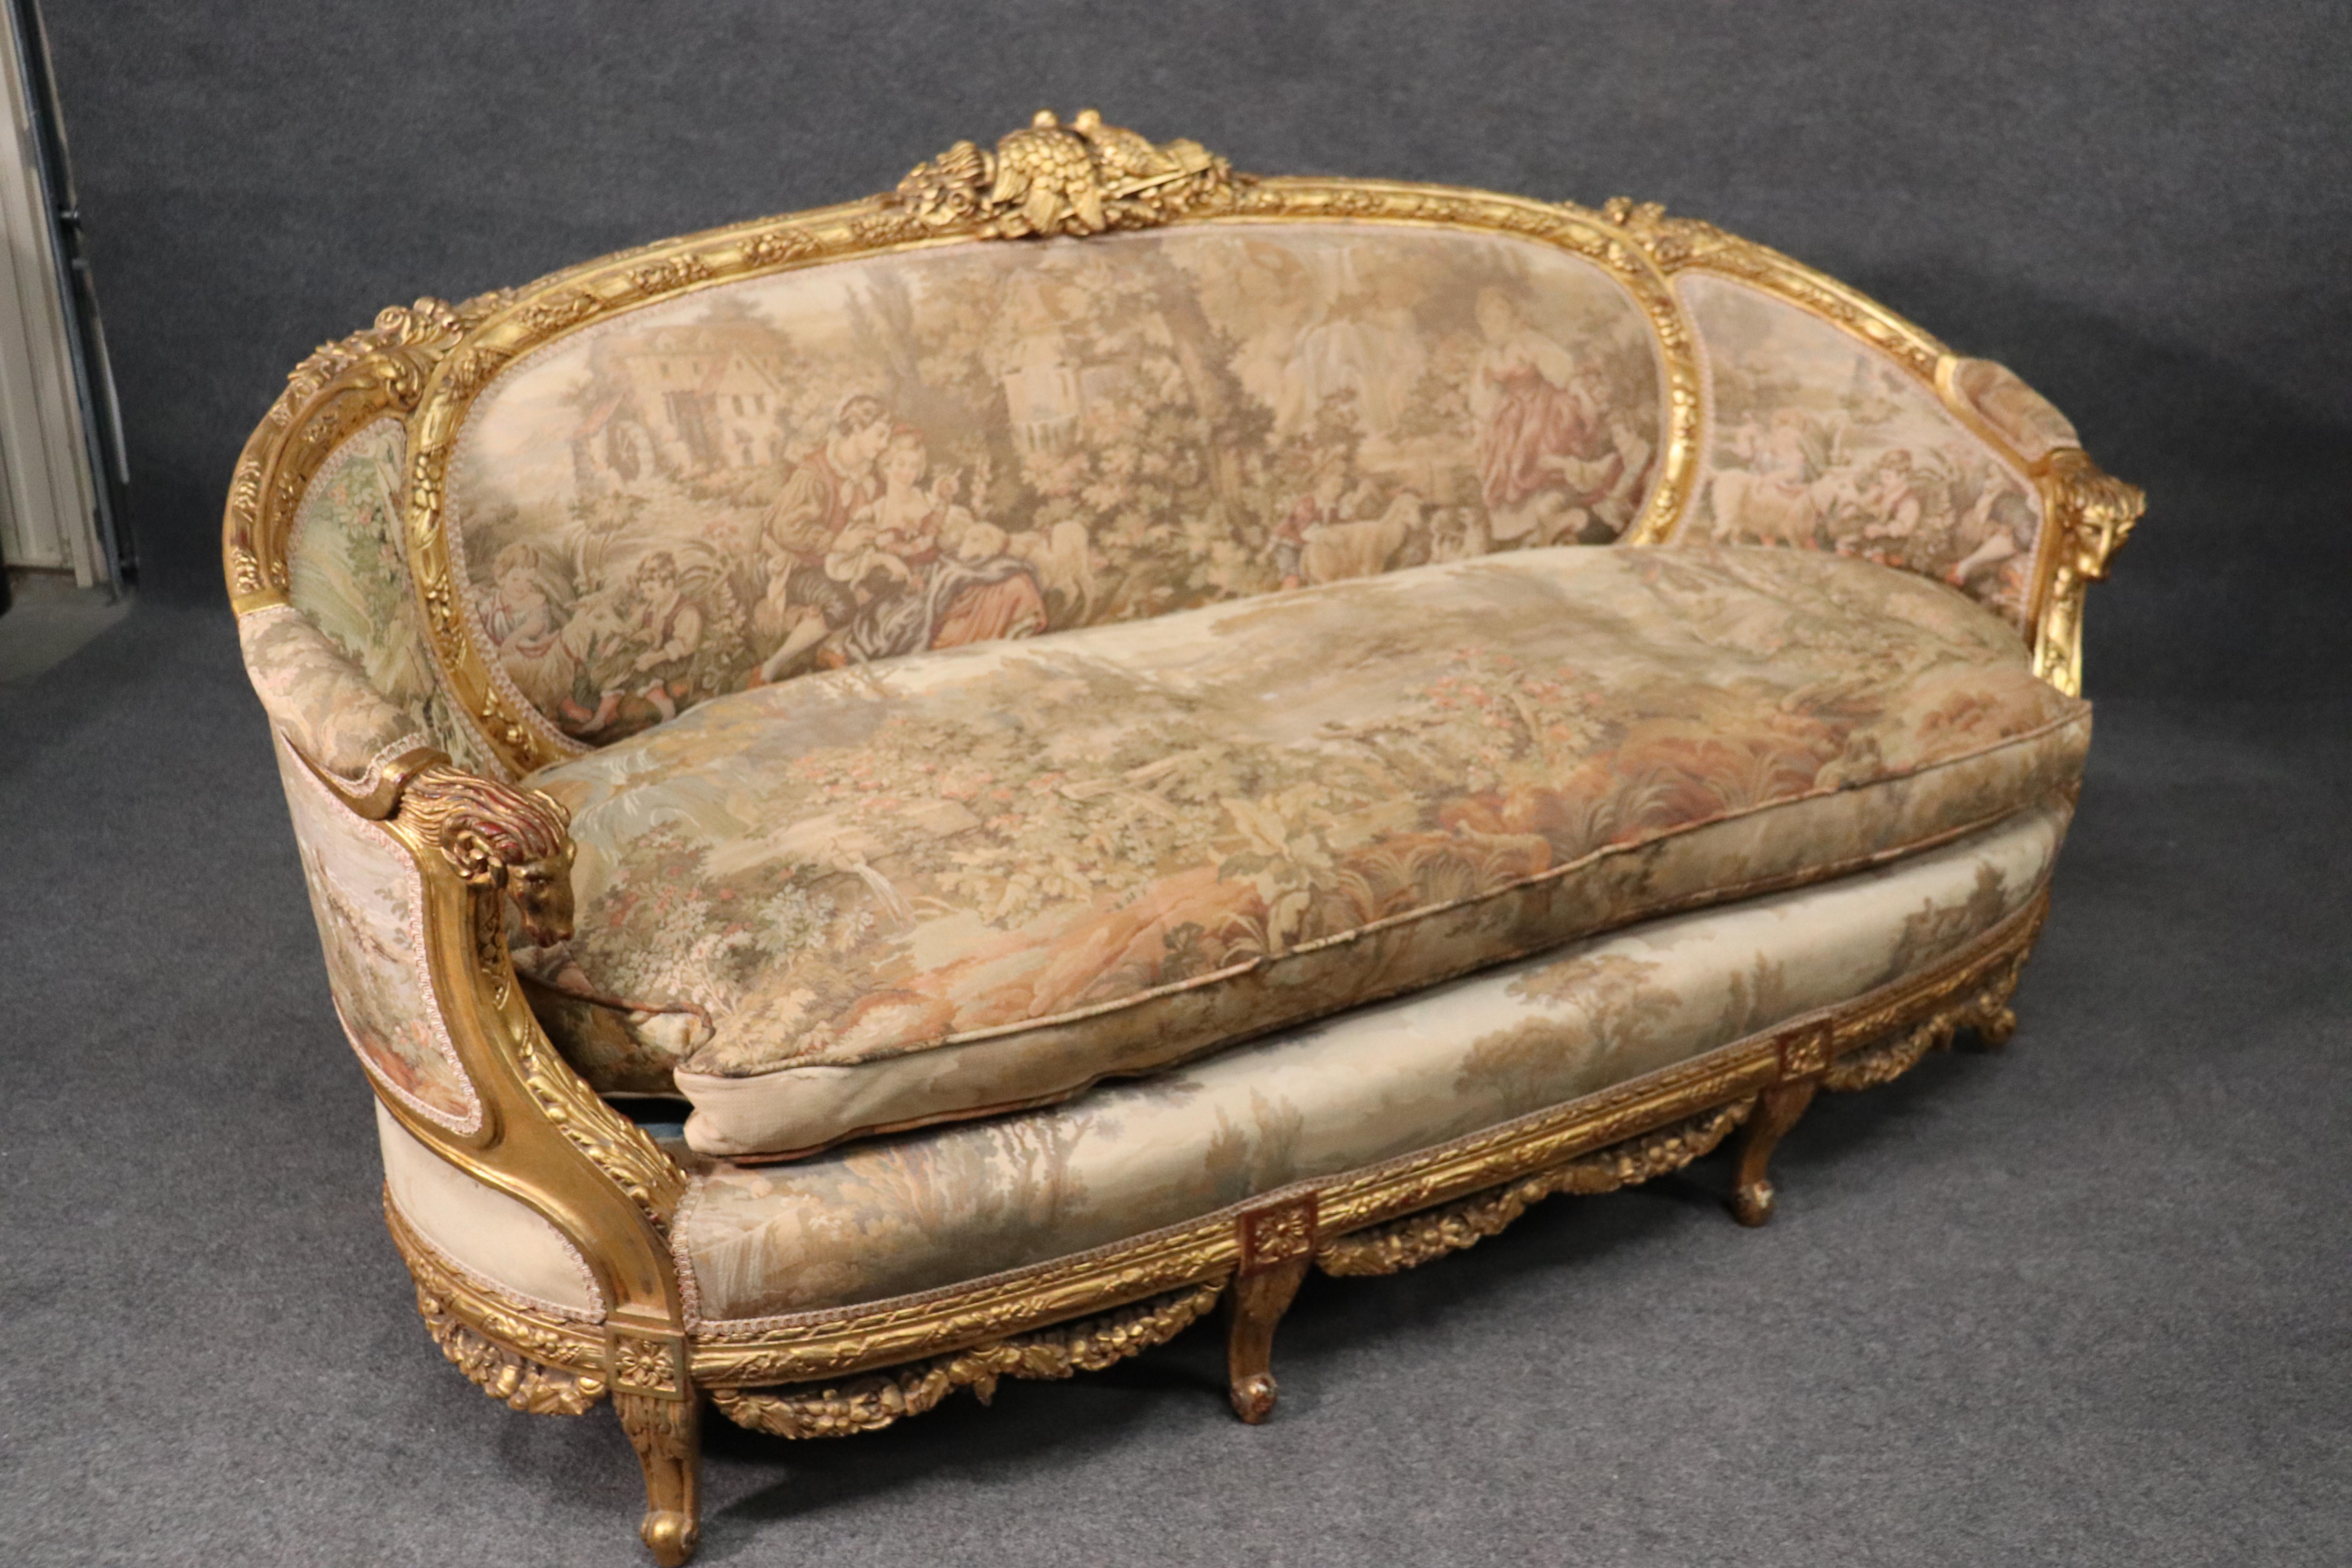 This is a fantastic sofa in genuine gold leaf over a red clay bole ground. The sofa is covered in a machine-made tapestry depicting courtship scenery and the usual French romantic themes. The sofa is in very good original condition and has no major